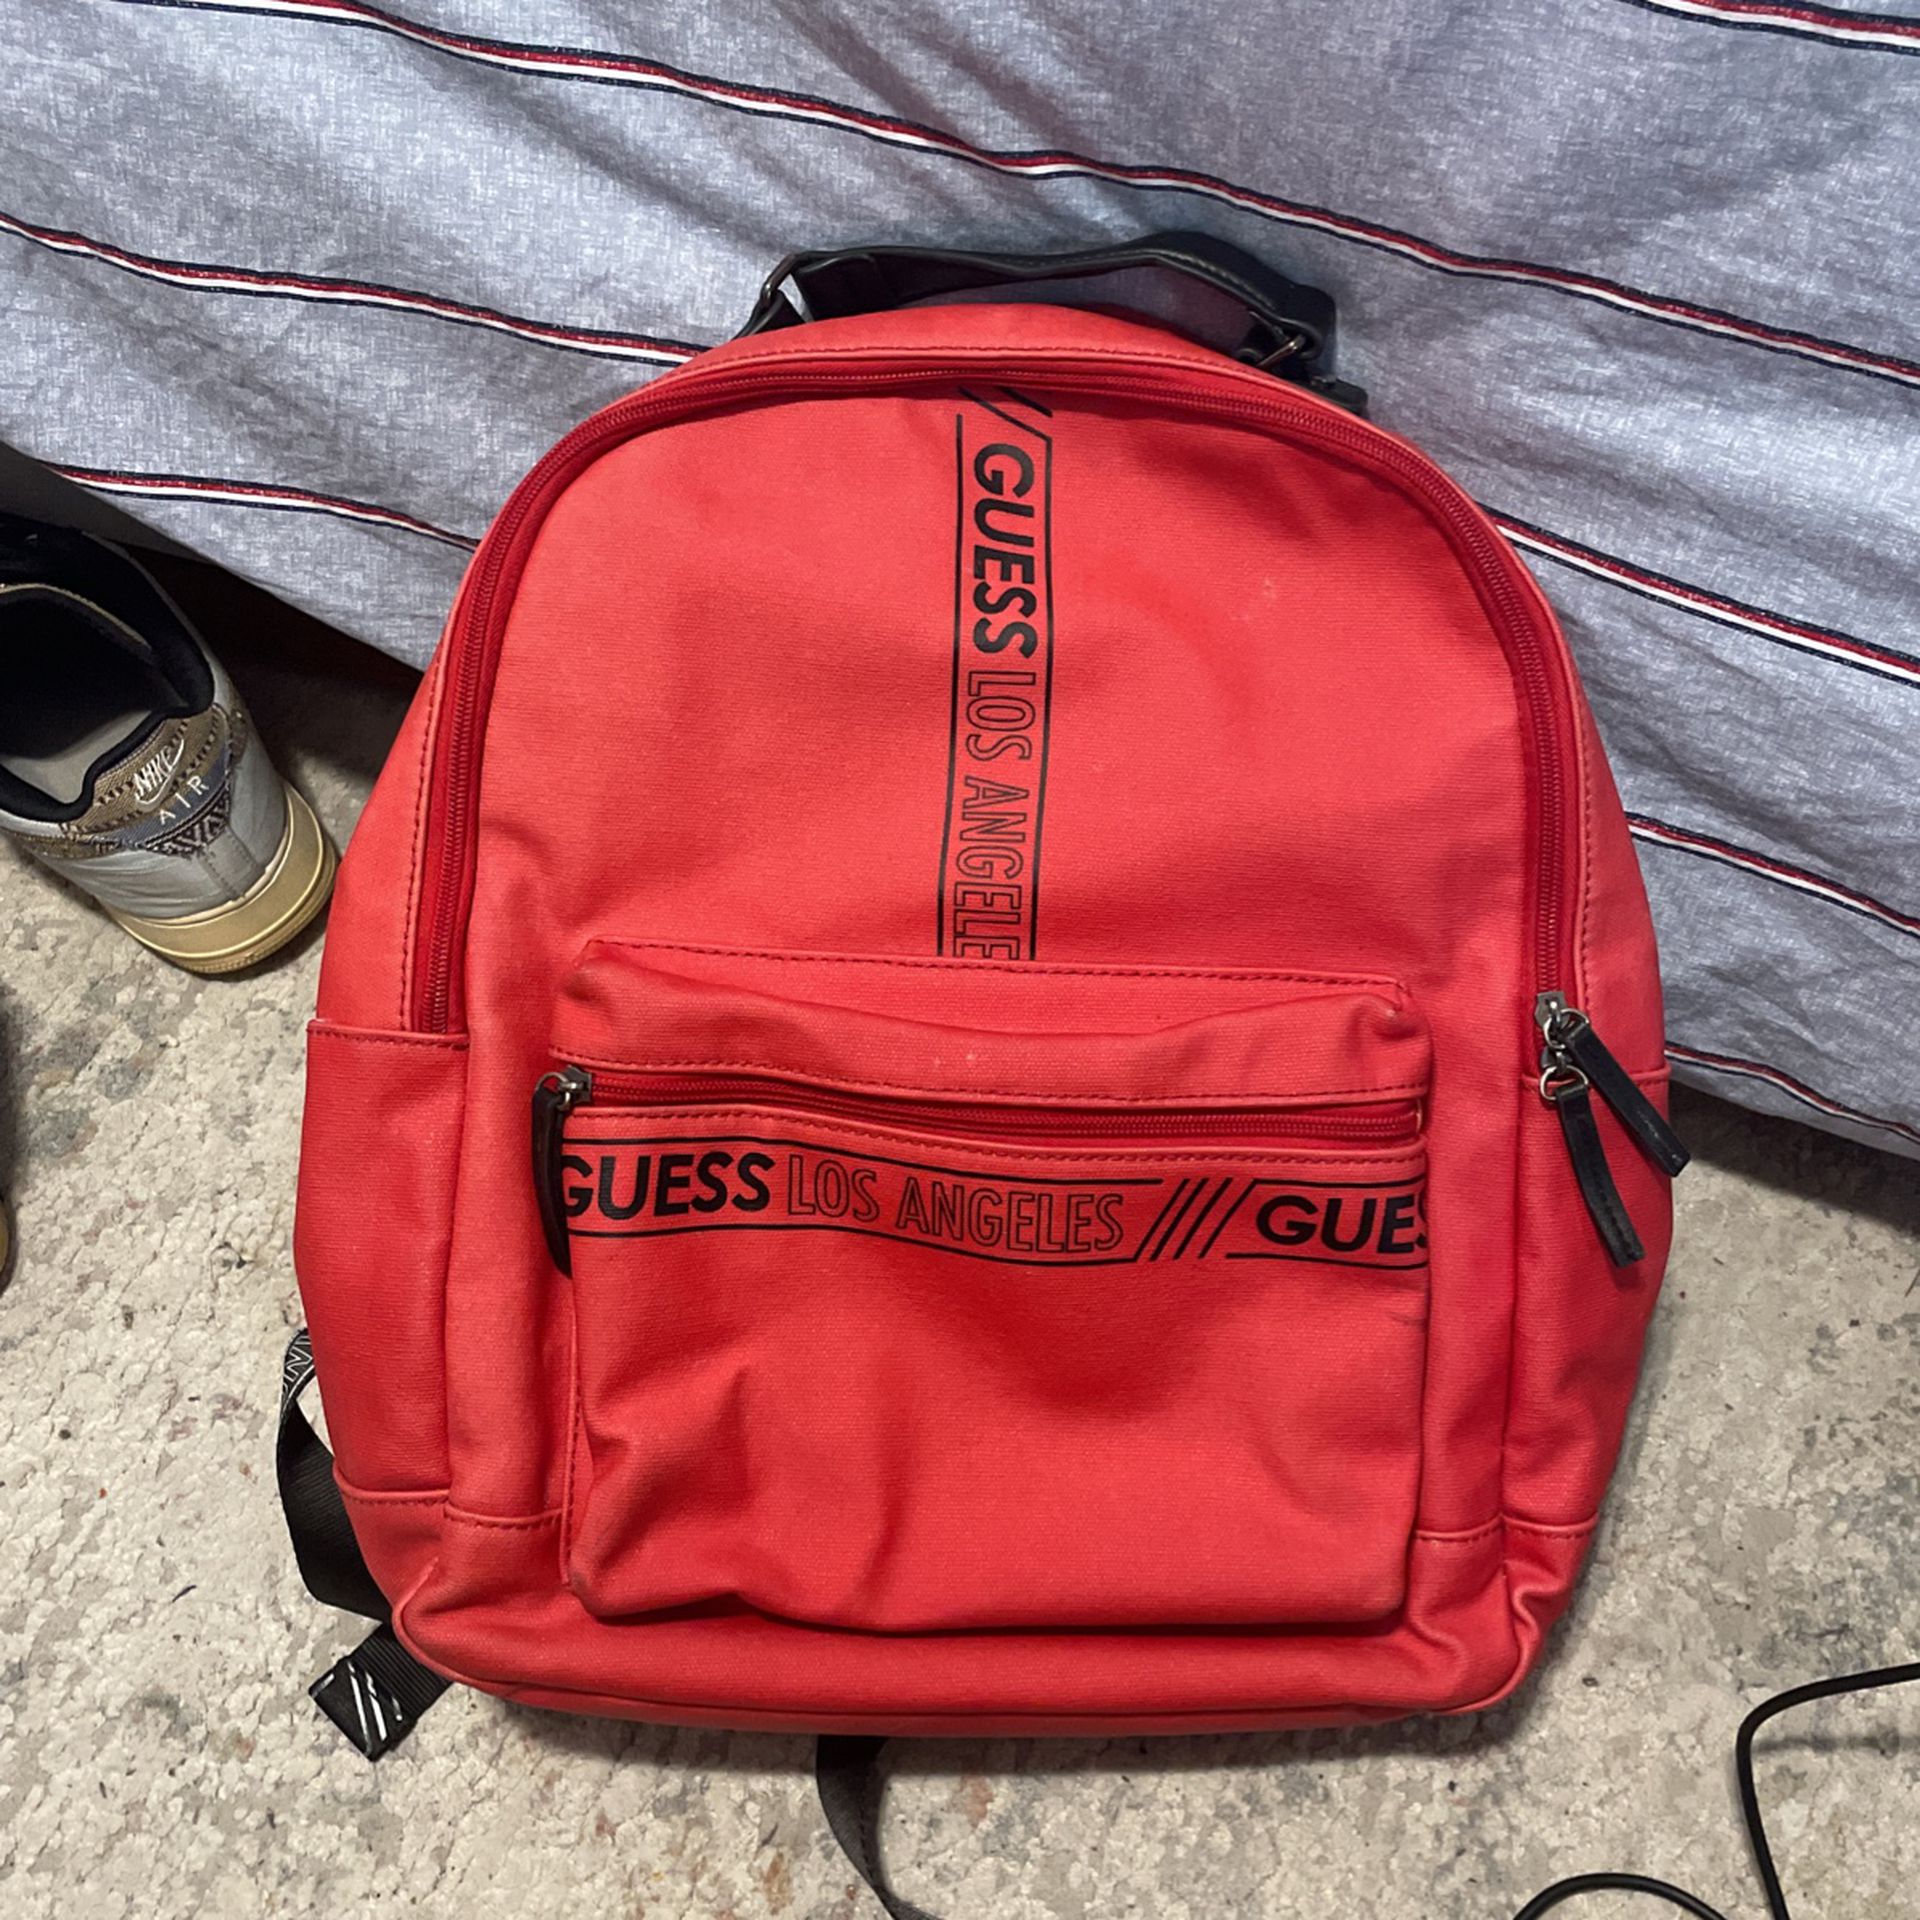 Guess Mens Backpack